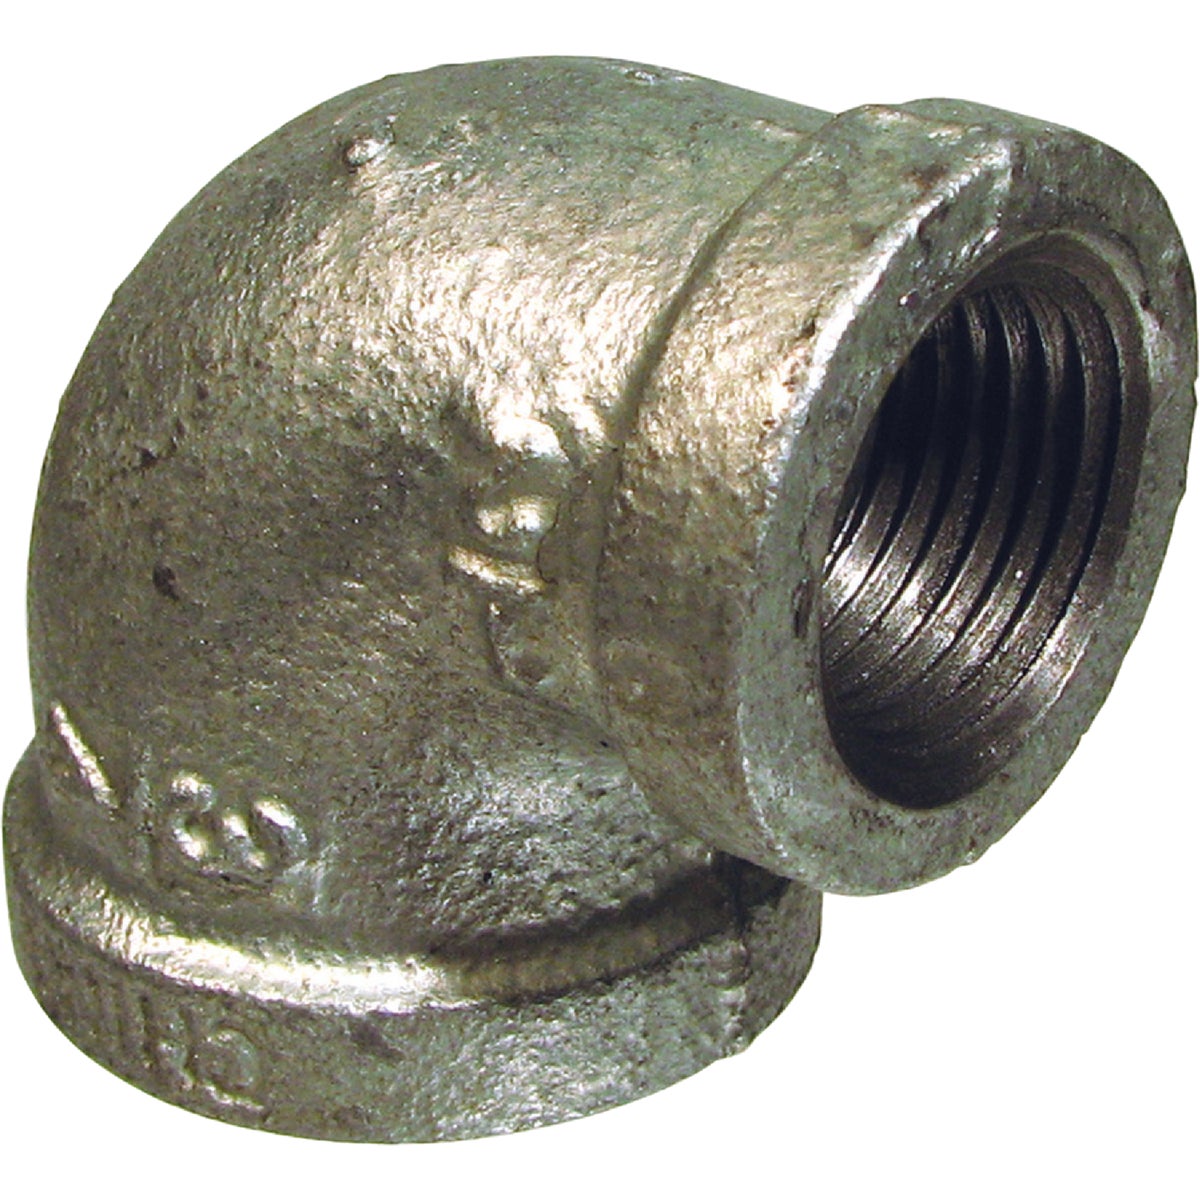 Southland 1-1/2 In. x 1-1/4 In. 90 Deg. Reducing Galvanized Elbow (1/4 Bend)